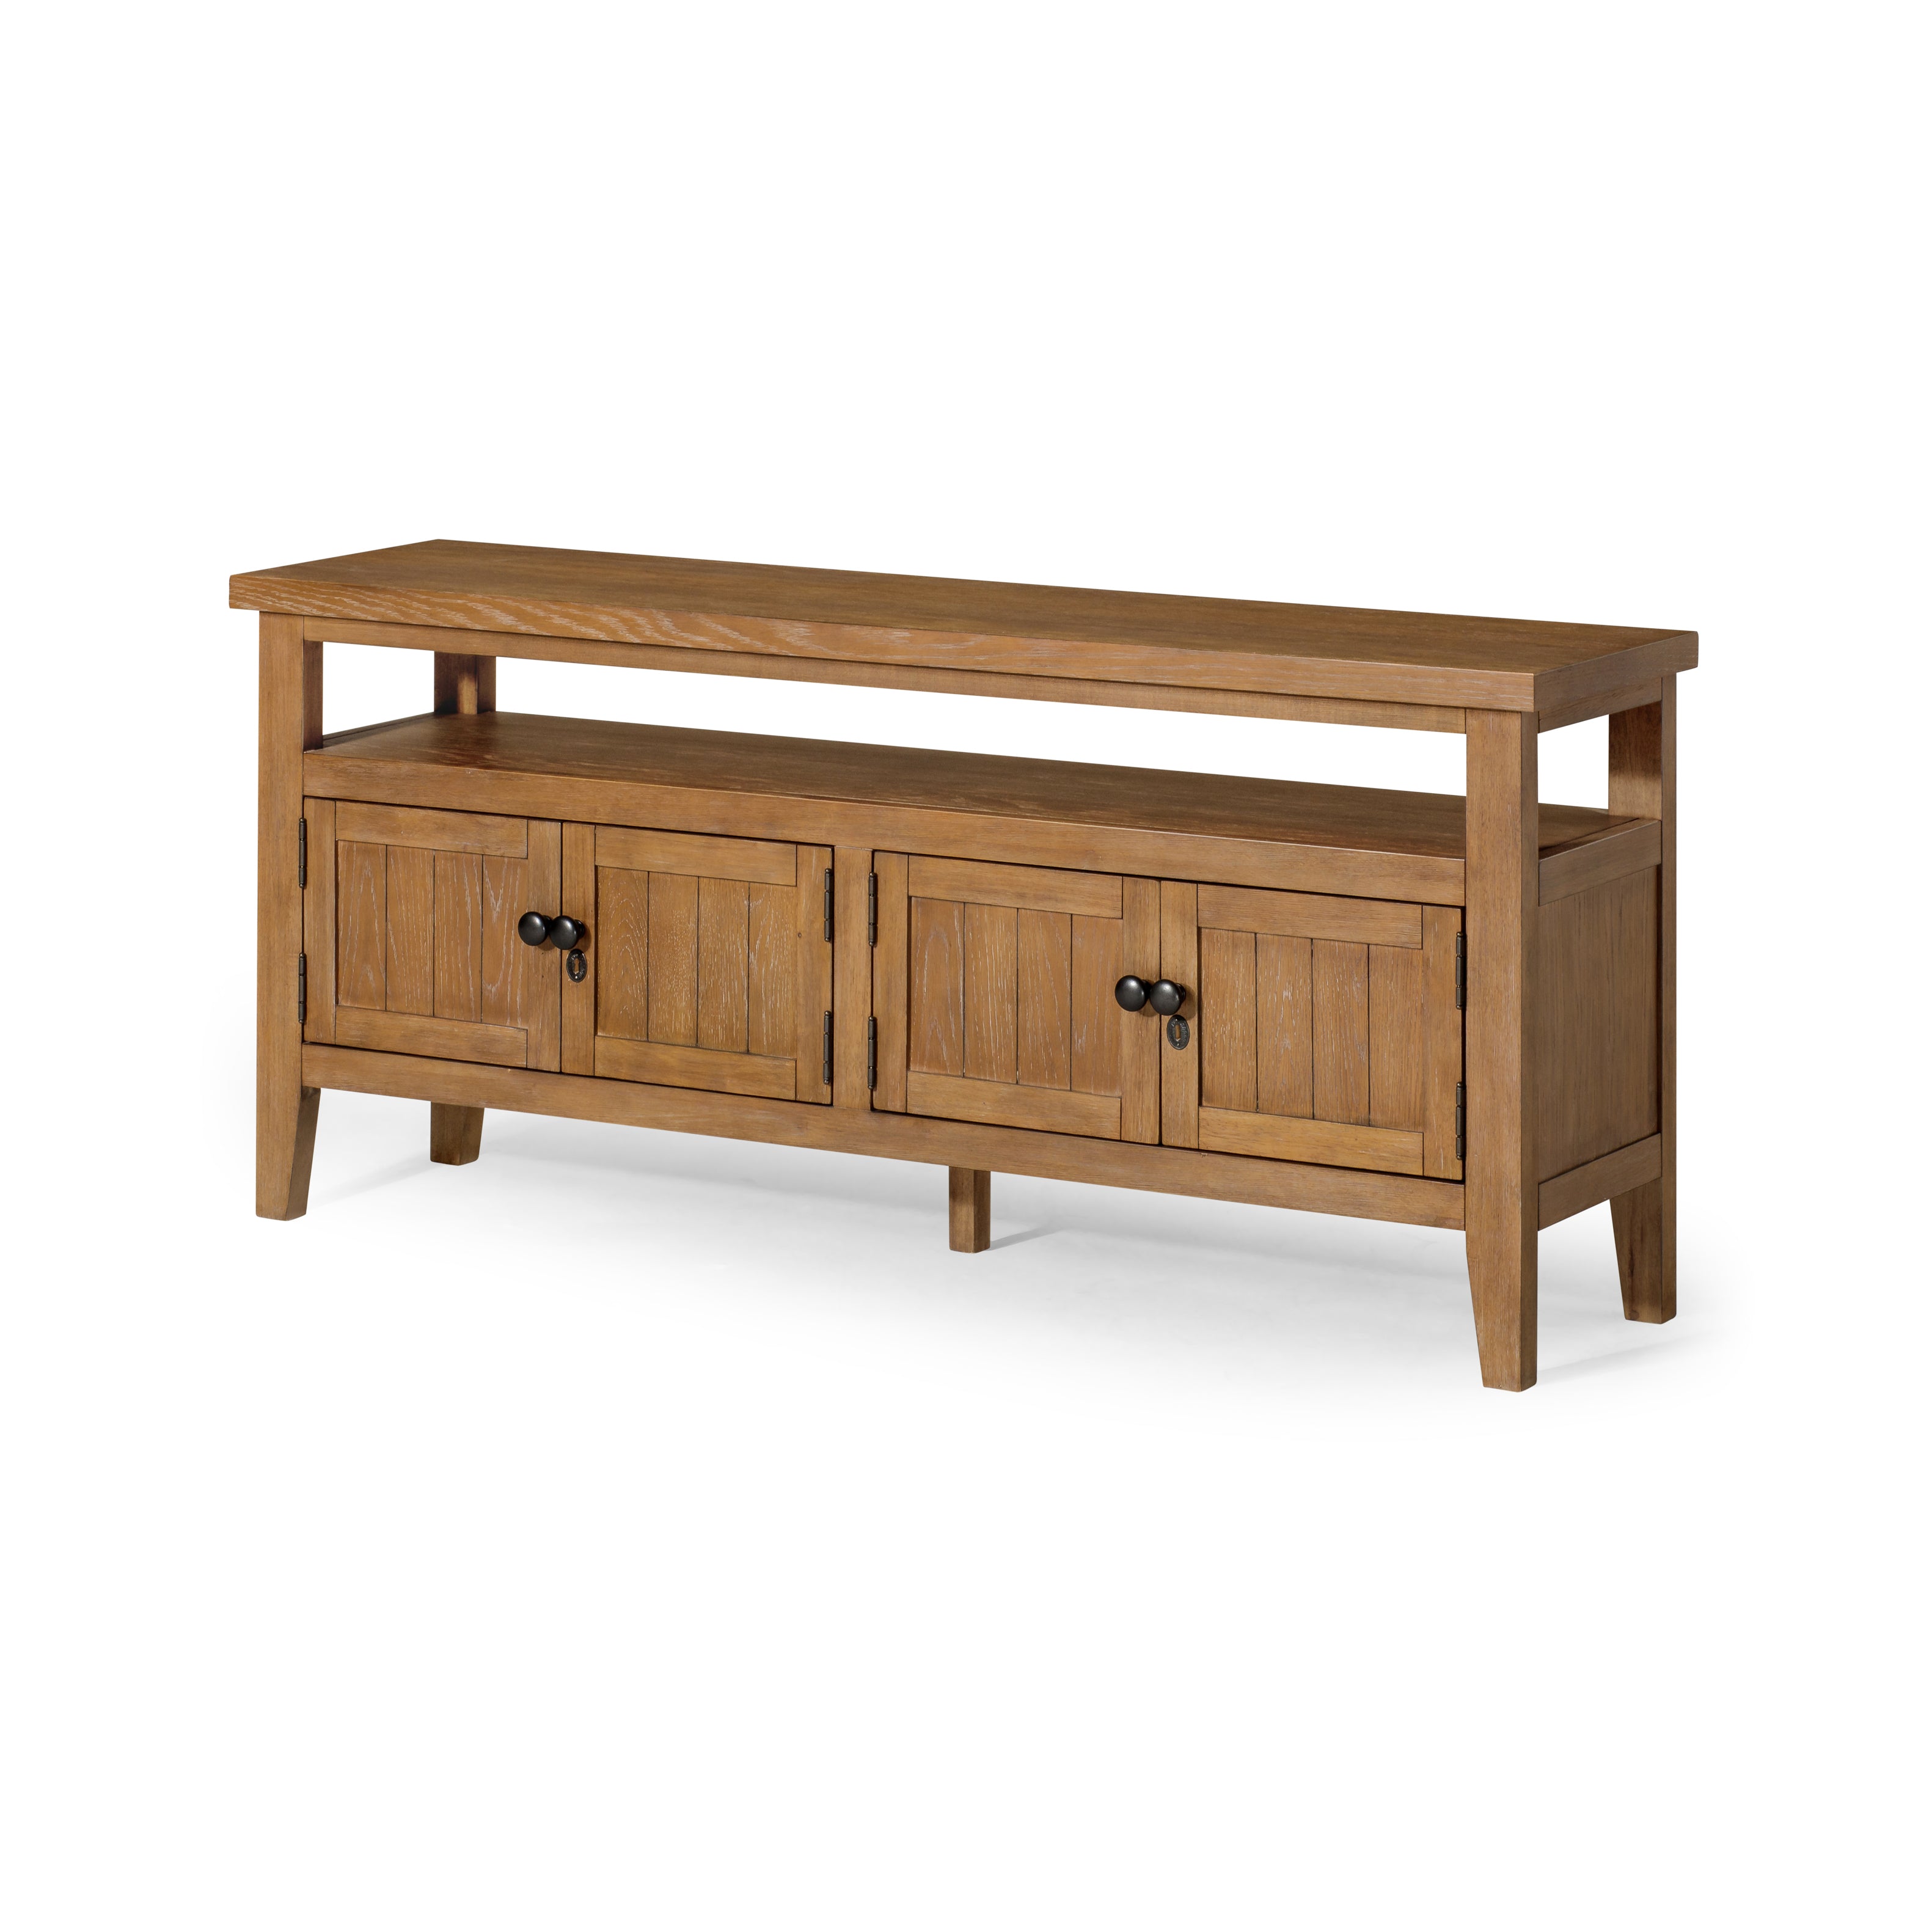 Turner Classical Wooden Media Unit in Antiqued Natural Finish in Media Units by Maven Lane